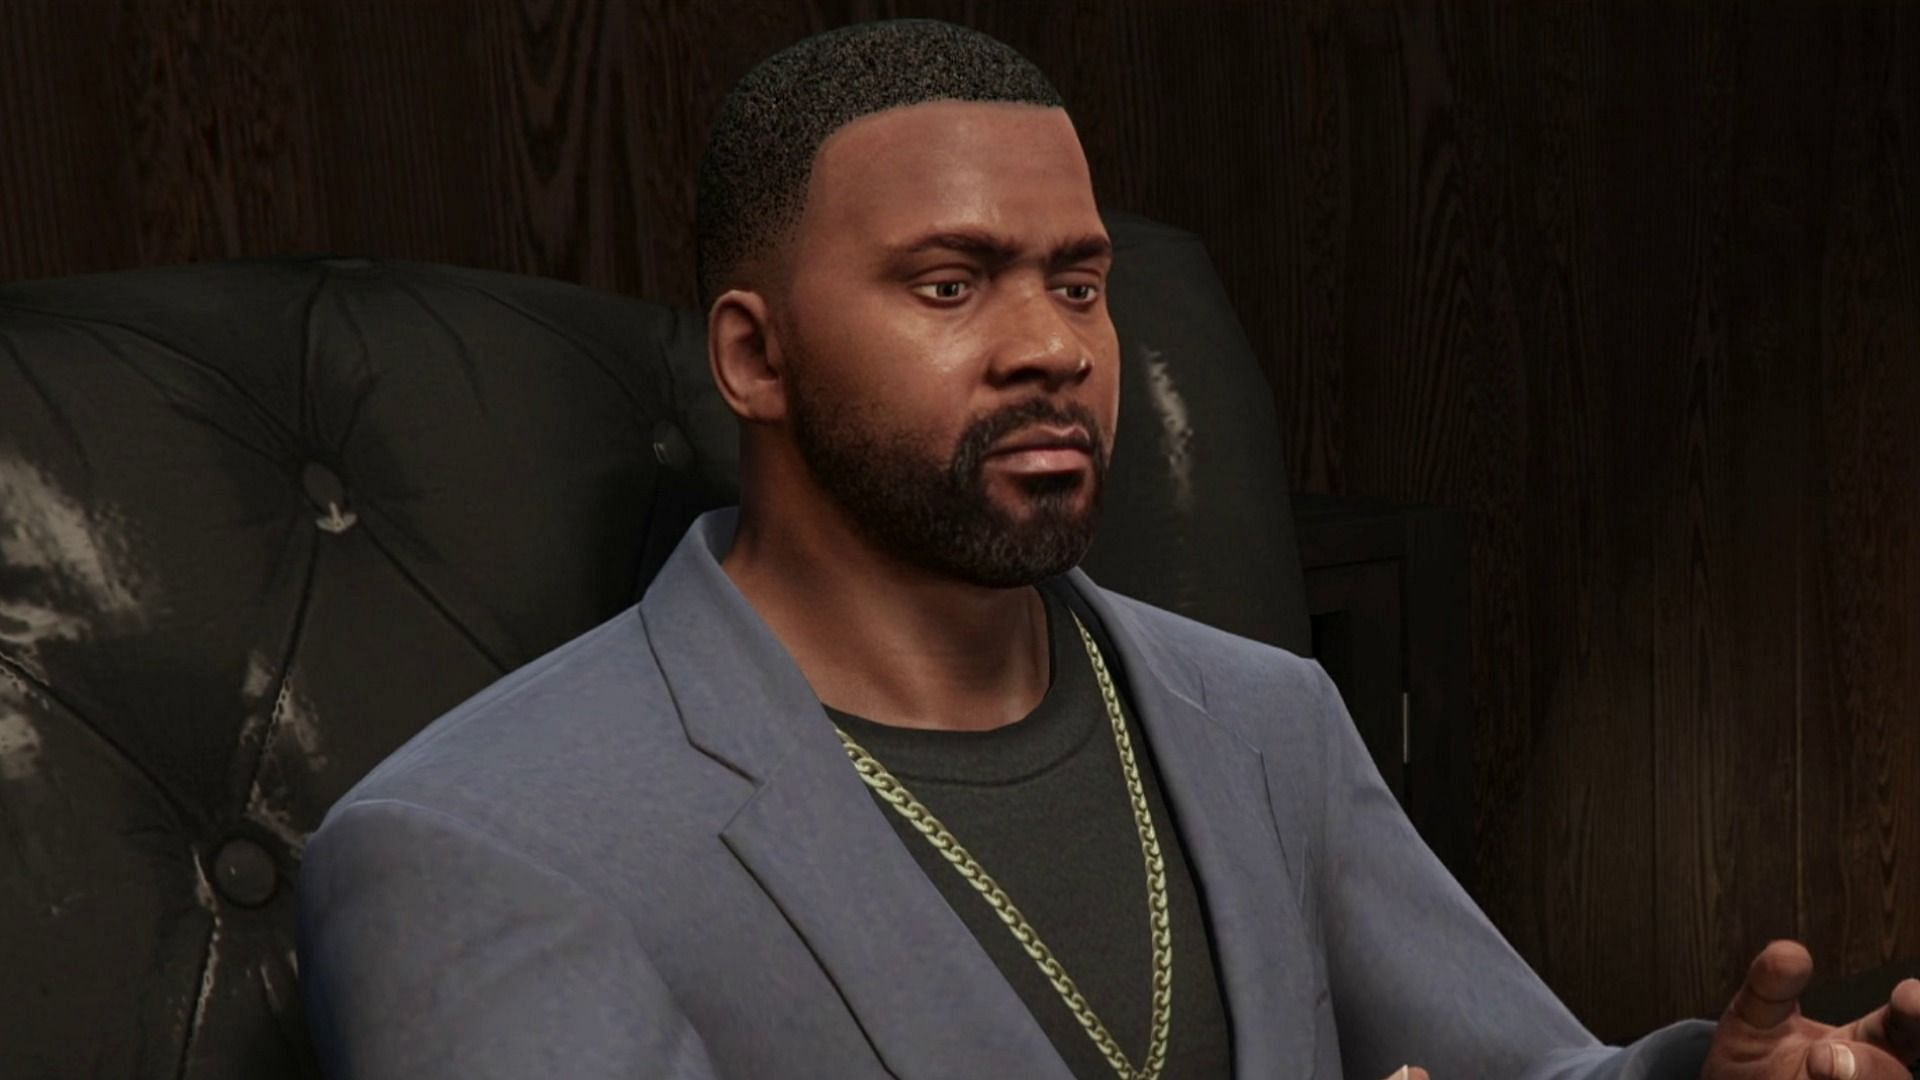 Franklin Clinton is now 33 years old and runs a specialized agency (Image via Rockstar Games)